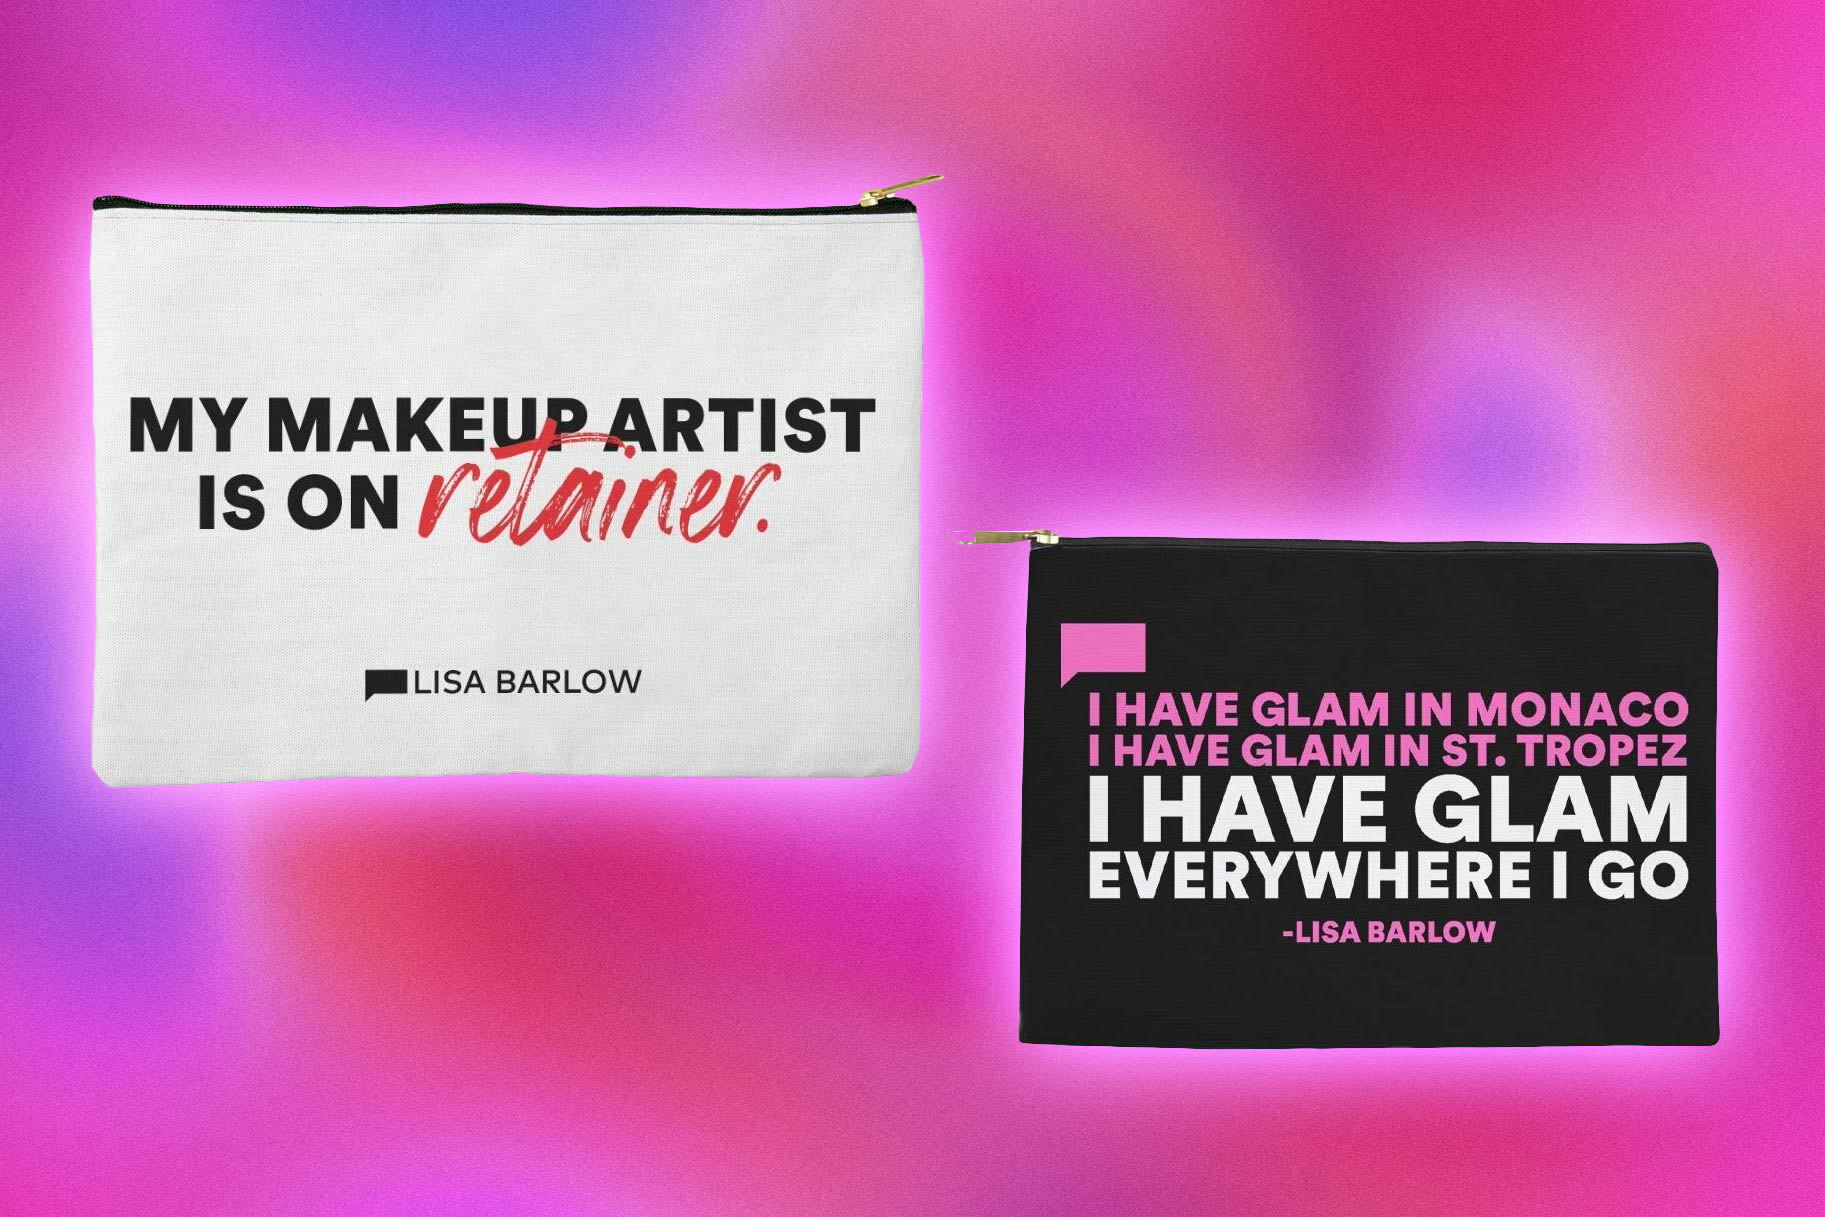 Lisa Barlow Spends $60K on Glam, But You Can Score a RHOSLC Makeup Bag for Under $20 | Bravo TV Official Site